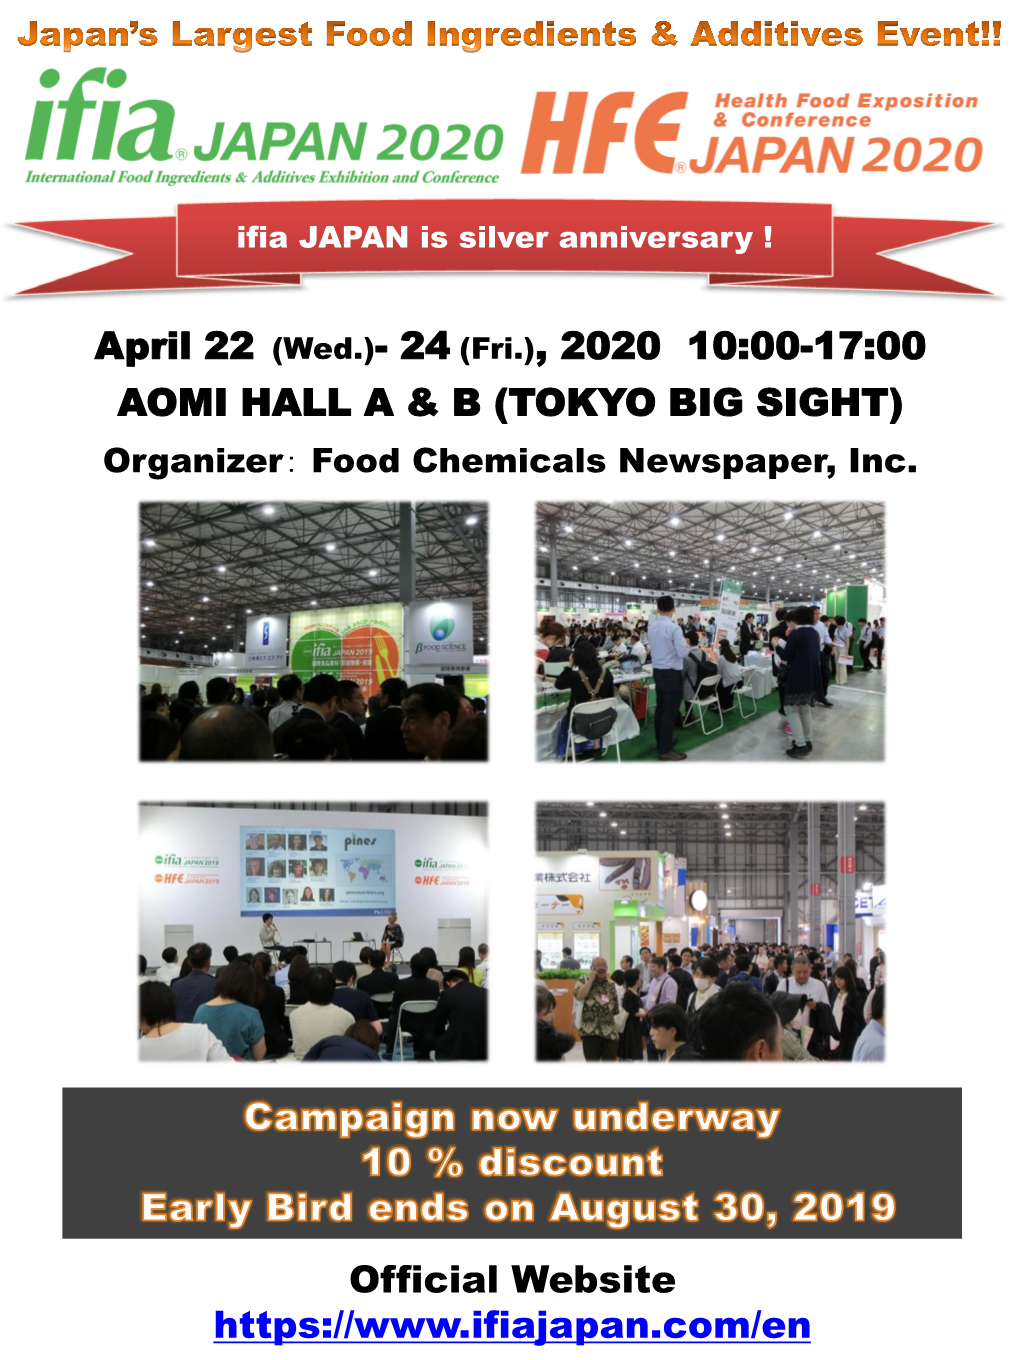 Ifia/HFE JAPAN! the Gateway Into the Japanese Food Industry Market!